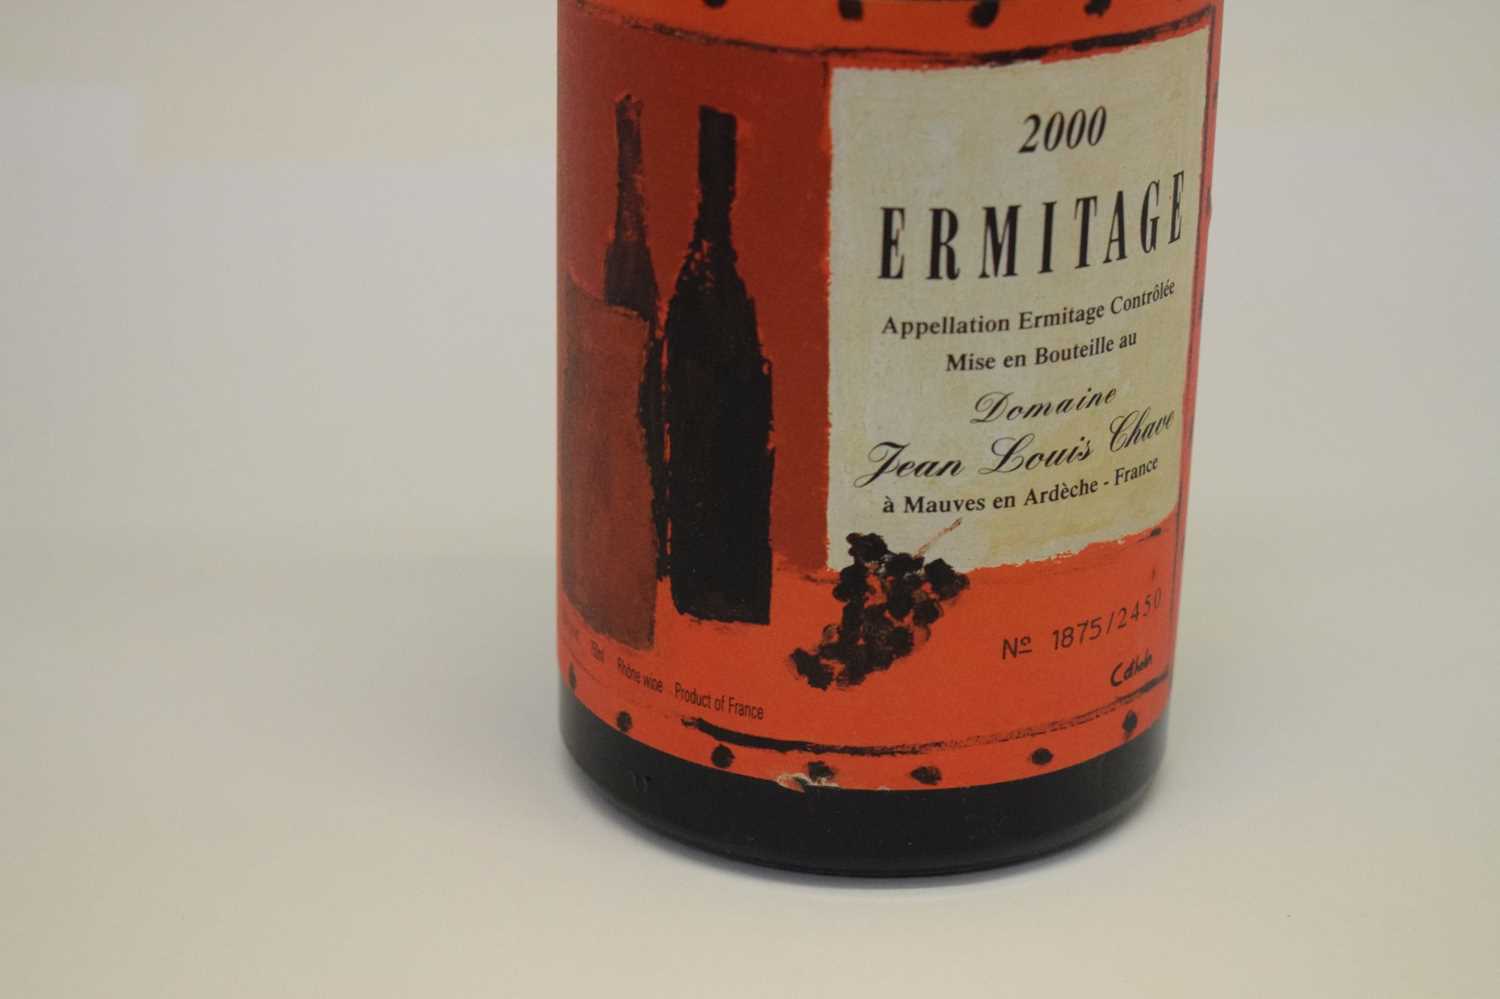 Domaine Jean-Louis Chave Ermitage 'Cuvée Cathelin', 2000, Hermitage, Rhône - Image 4 of 10